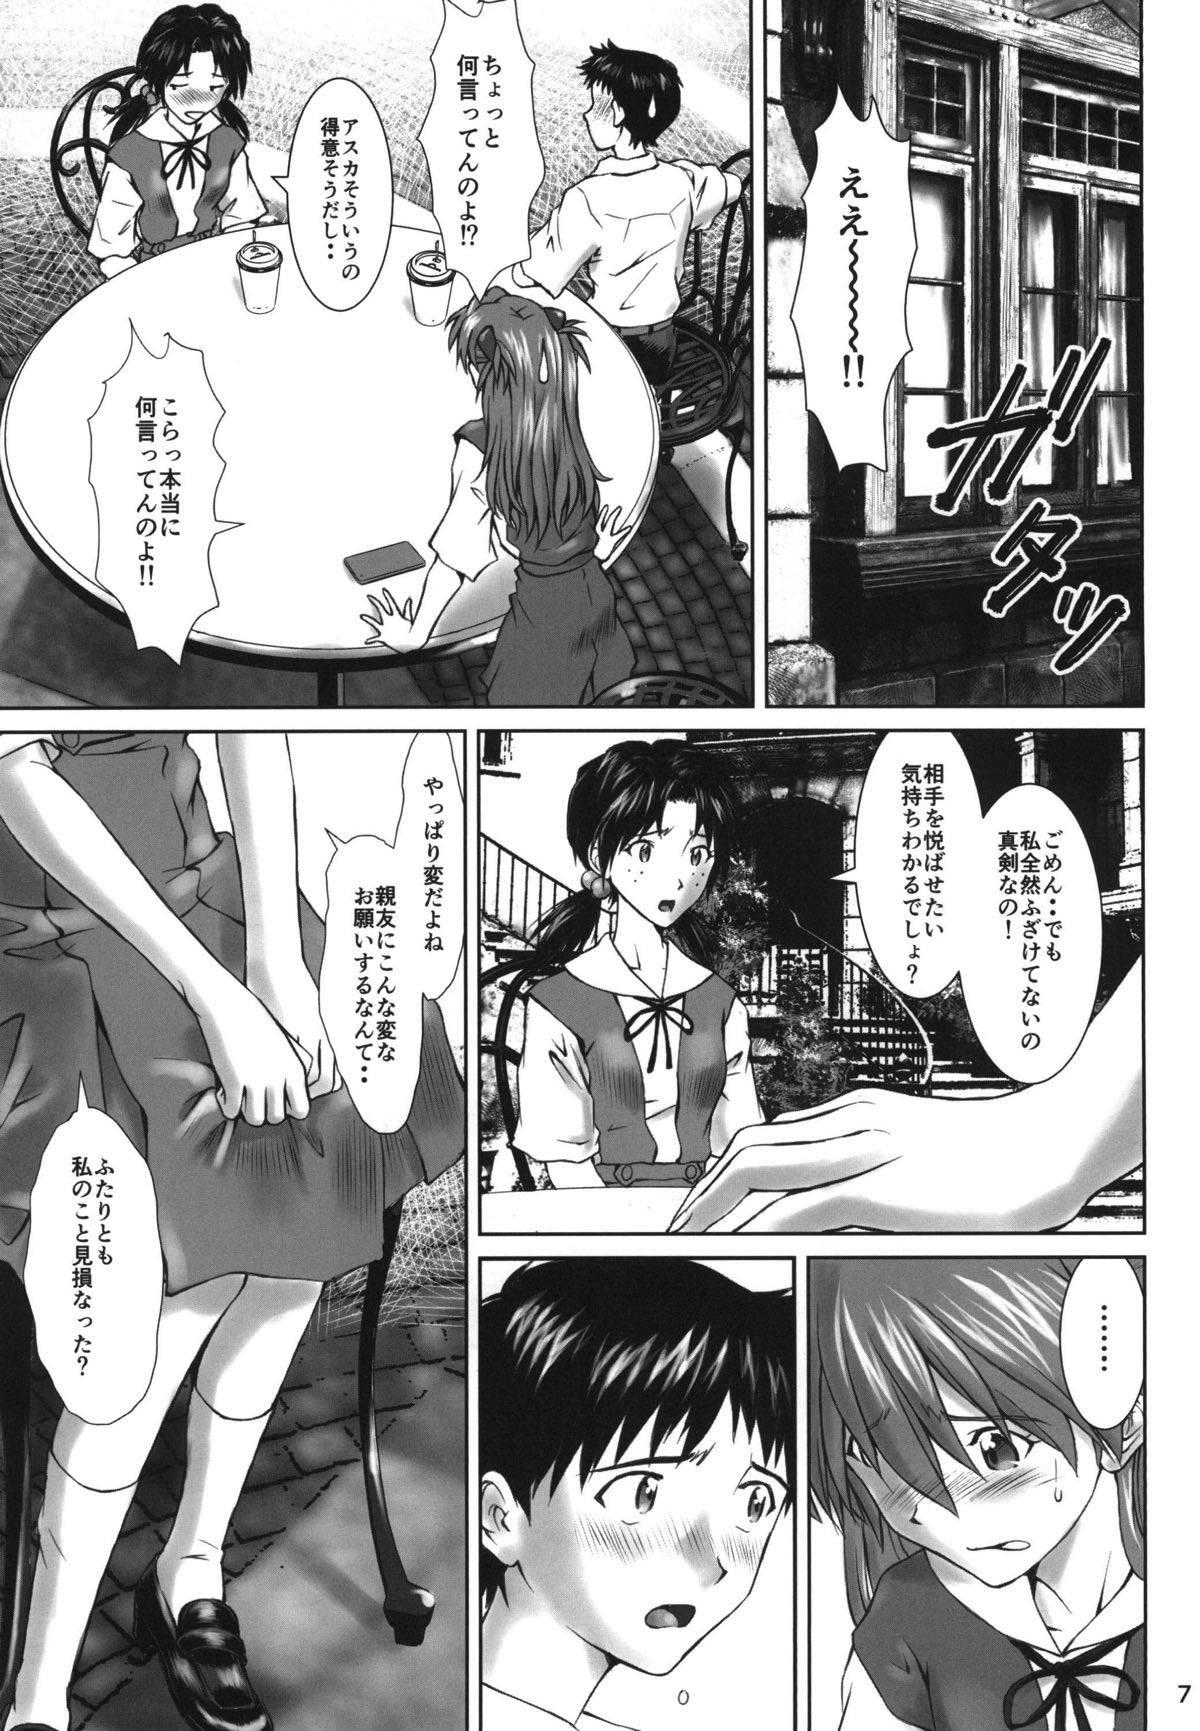 Stepdaughter Let's share it - Neon genesis evangelion Extreme - Page 6